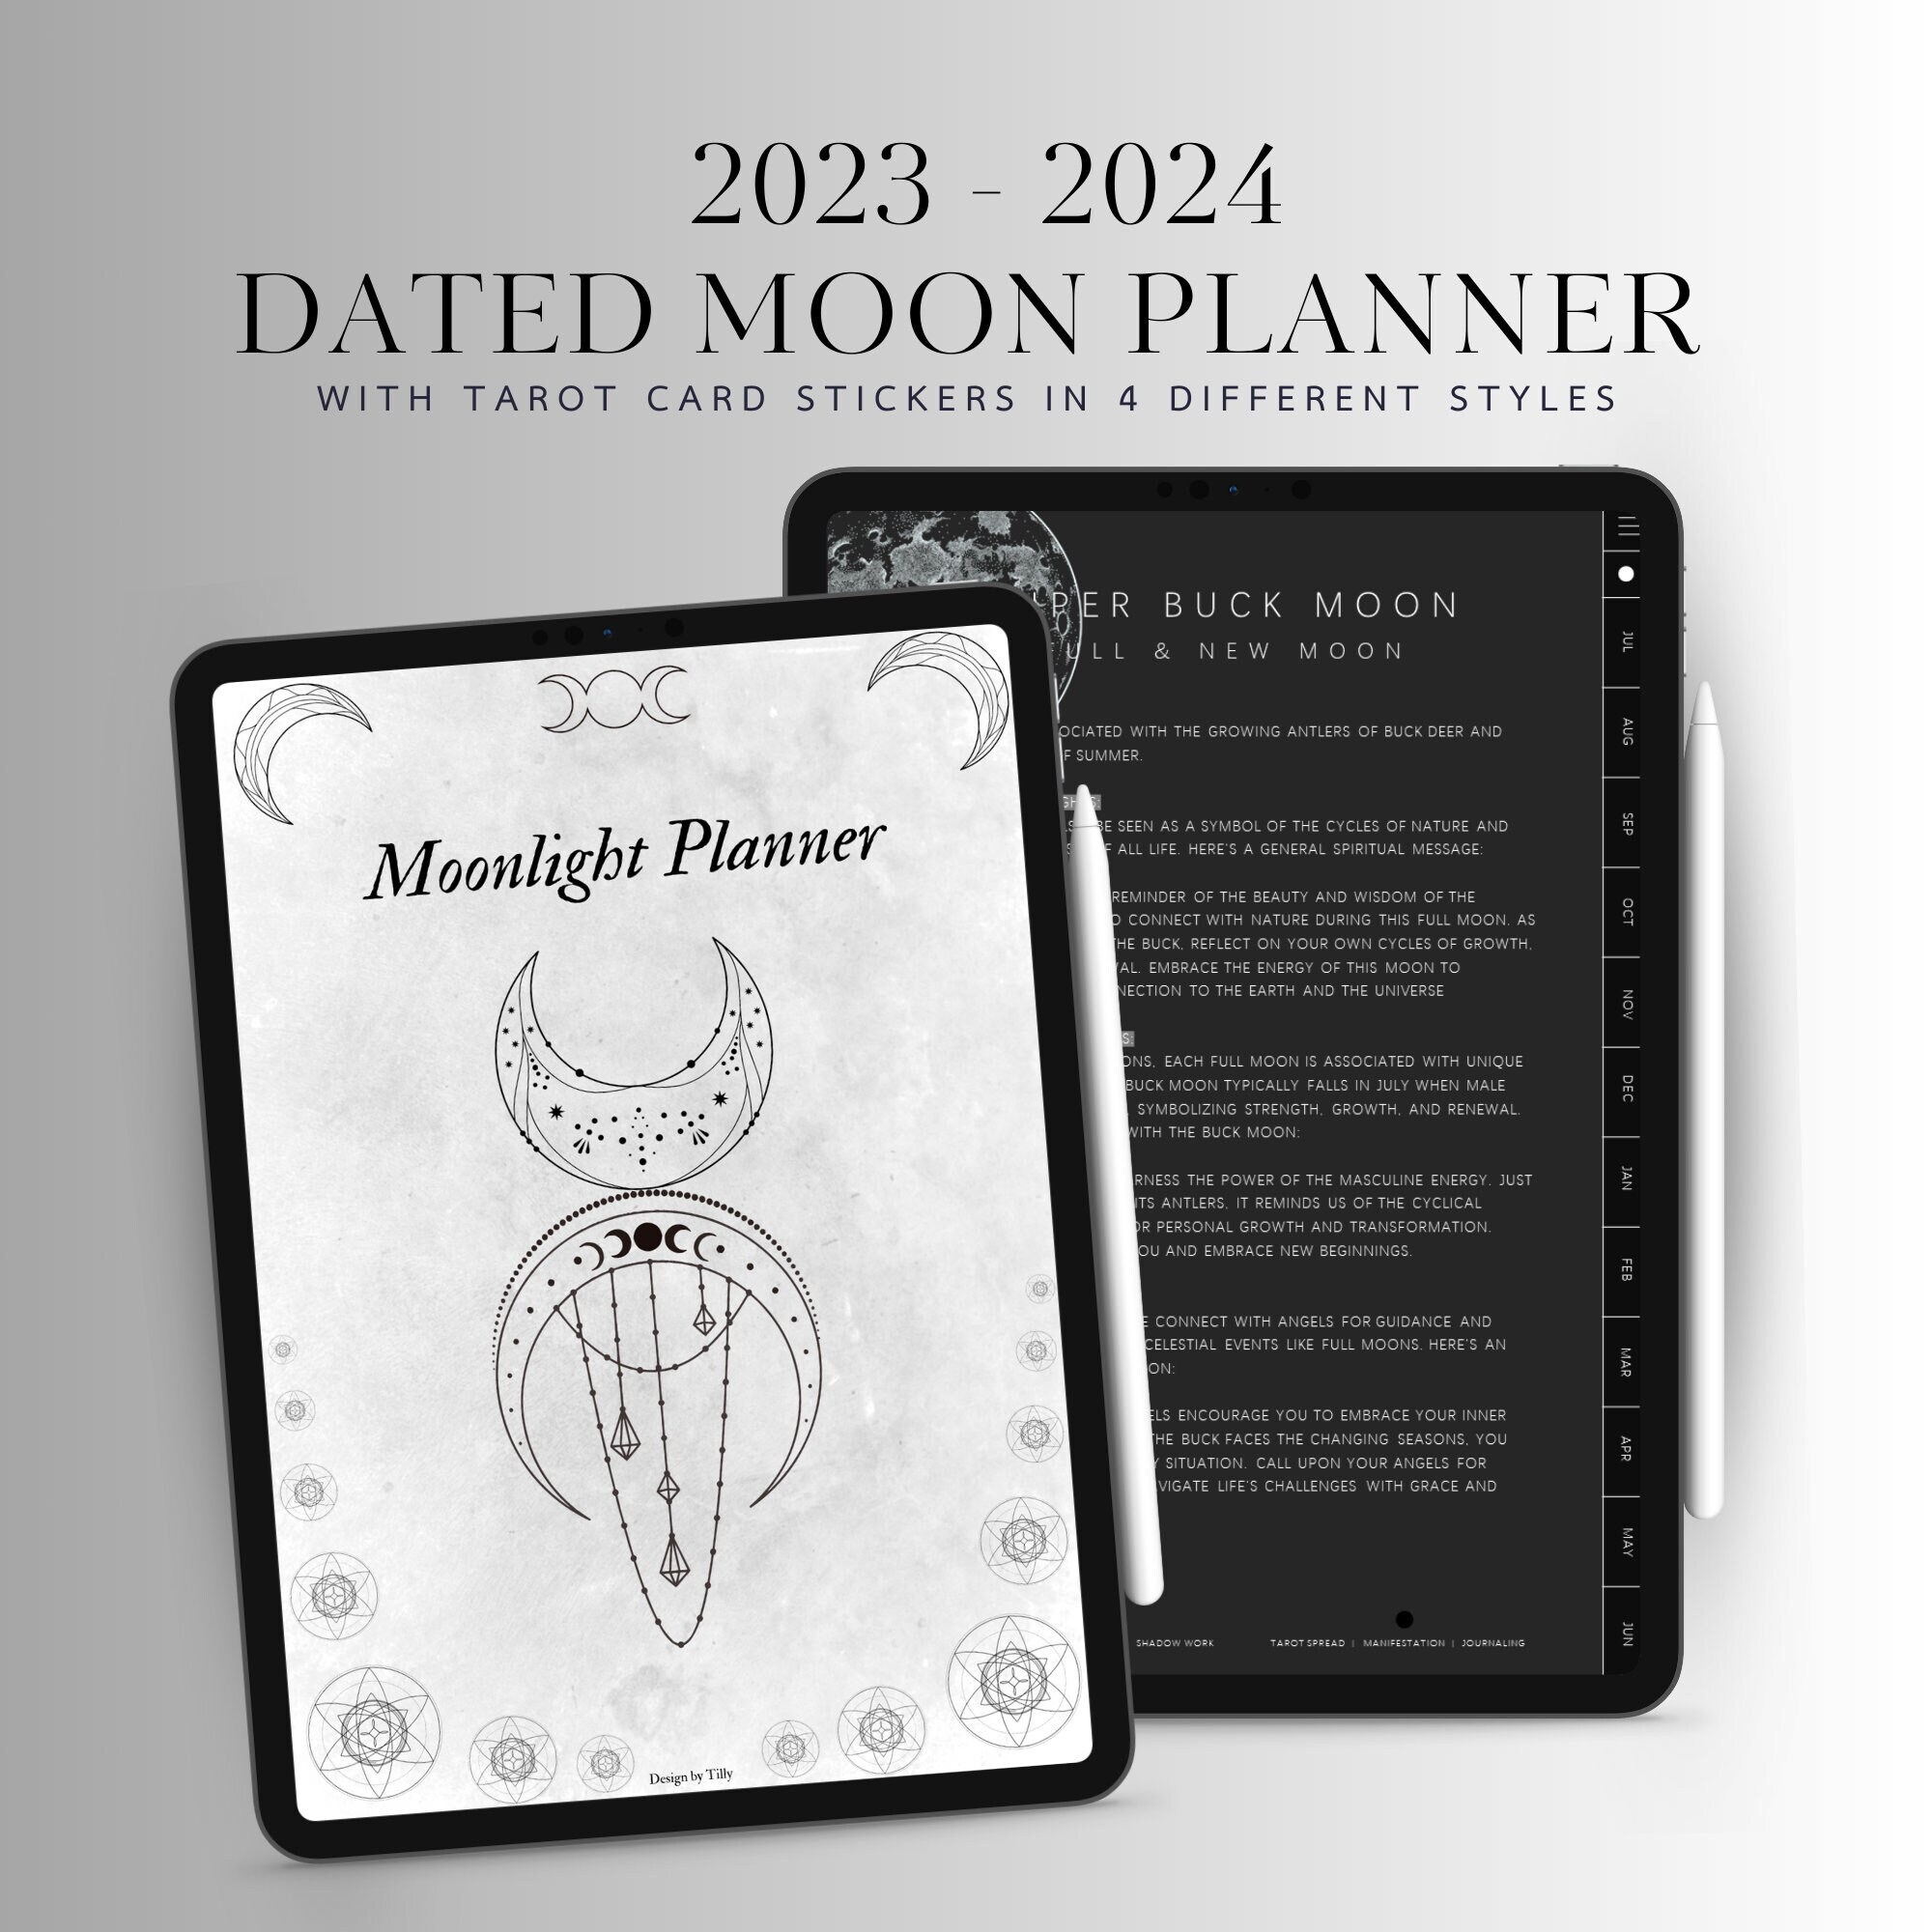 Moon Cycle & Moon Ritual Journal Digital, Moon Calendar 2023-2024, Dark  Mode, New and Full Moon Ritual, Witchy Planner, Baby Witch